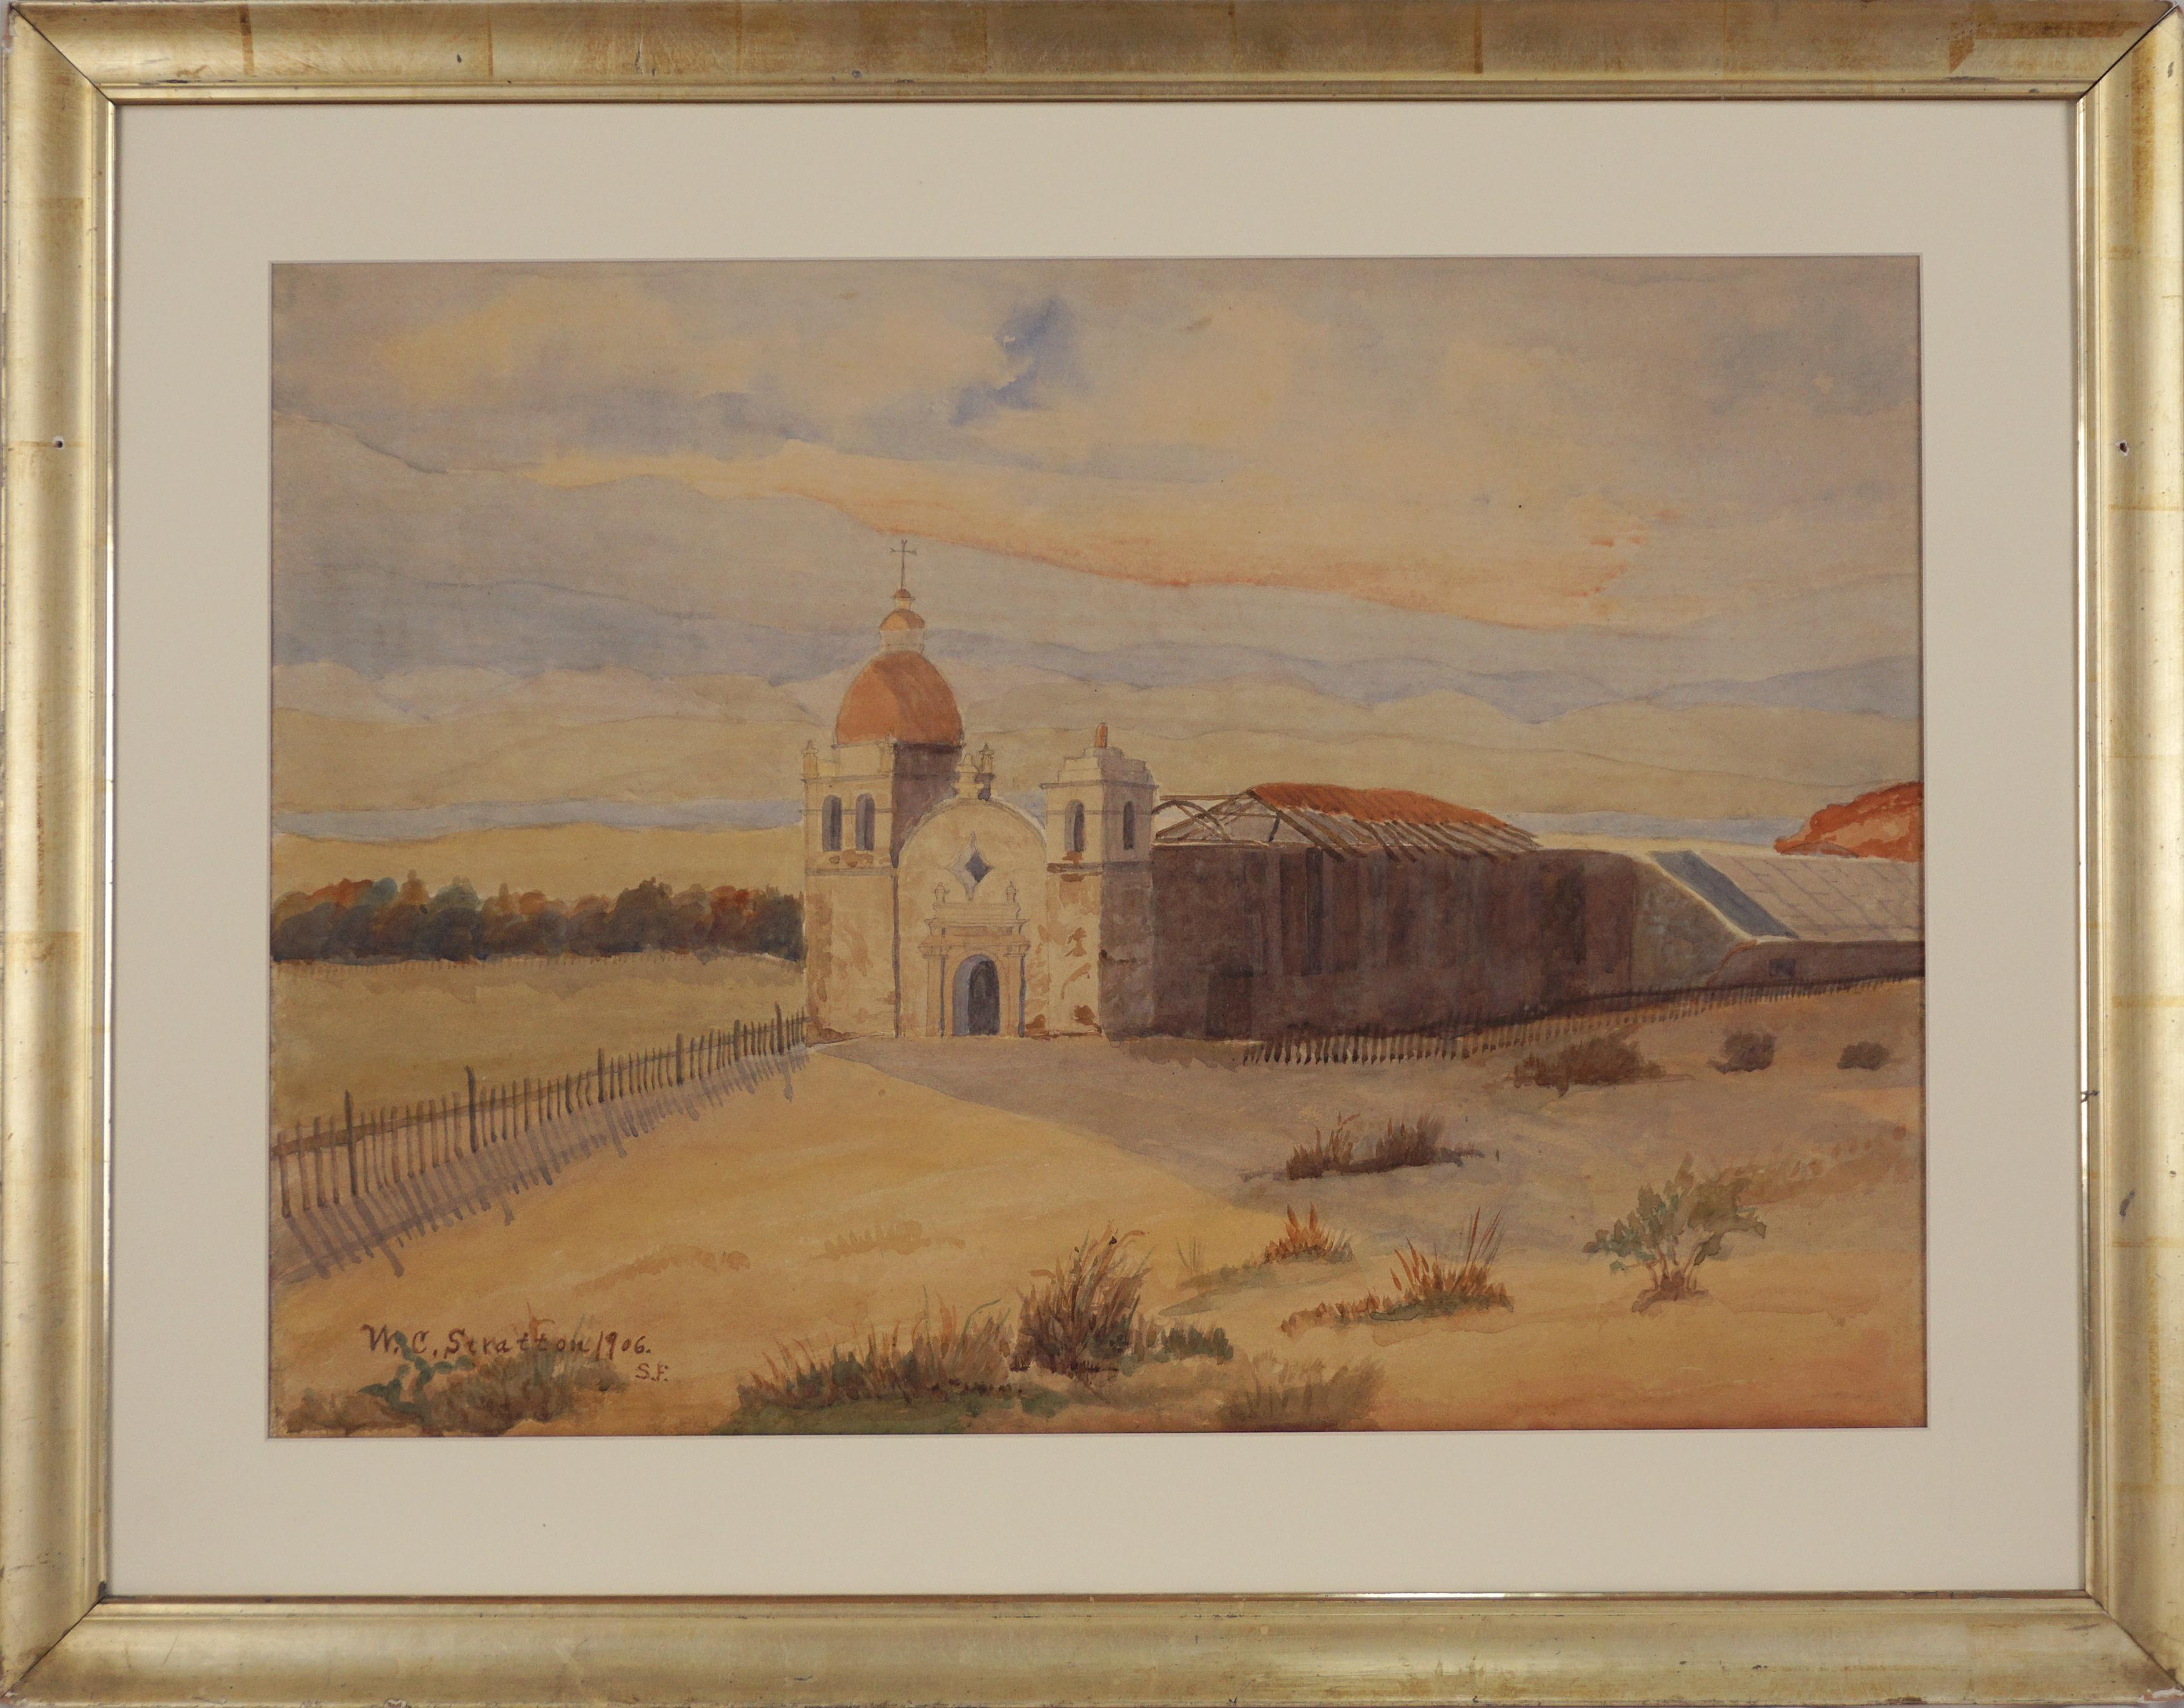 Wallace Clinton Stratton Landscape Painting - Early 20th Century Mission Carmel, California Watercolor. 